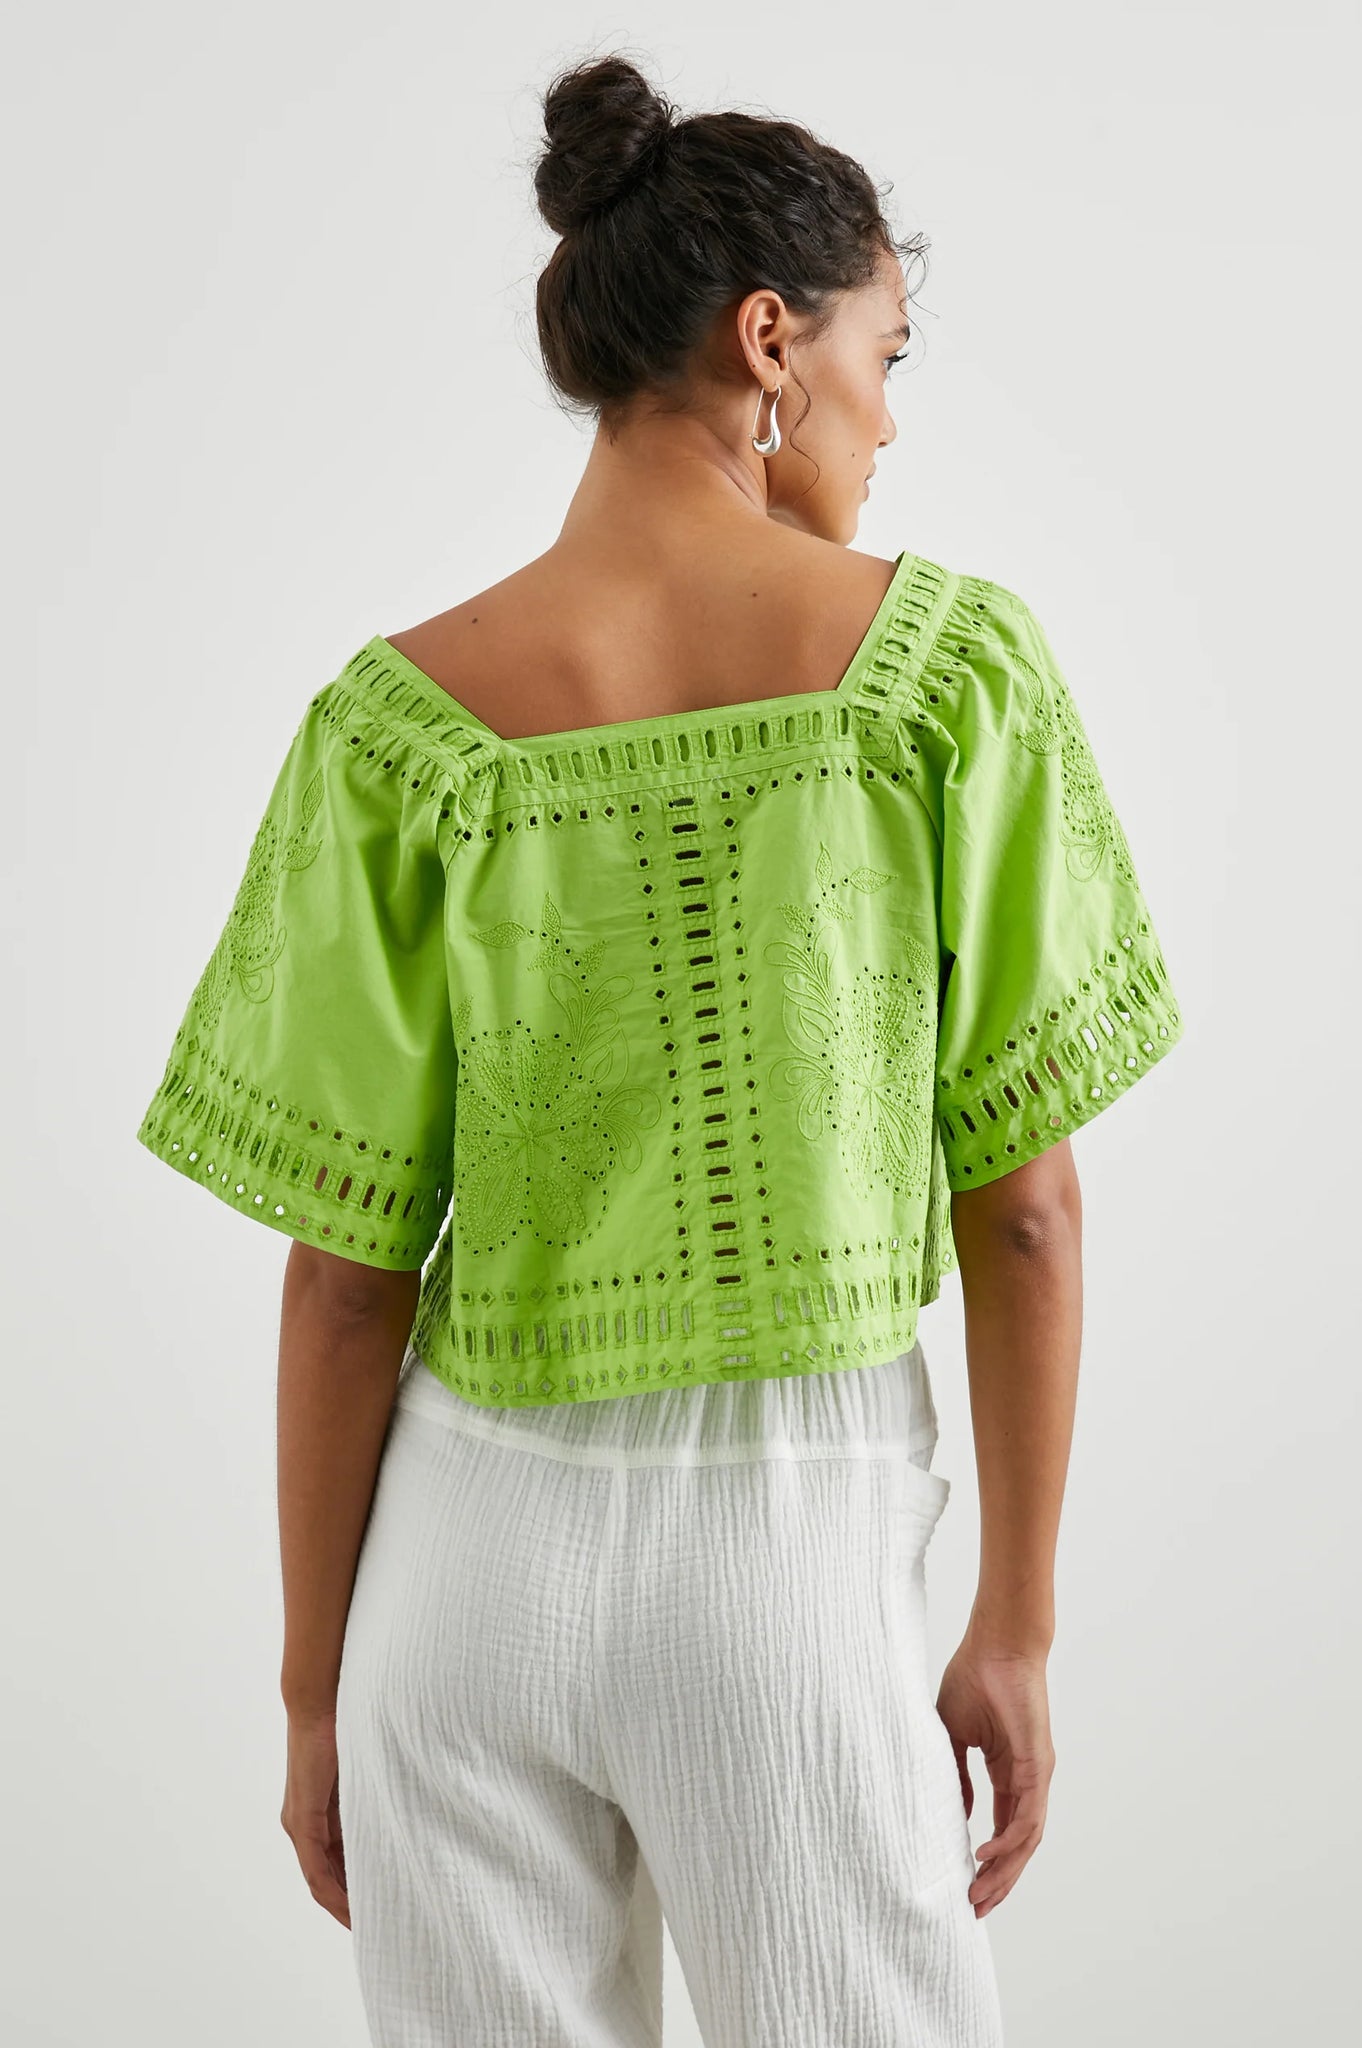 Laine Top in Island Green